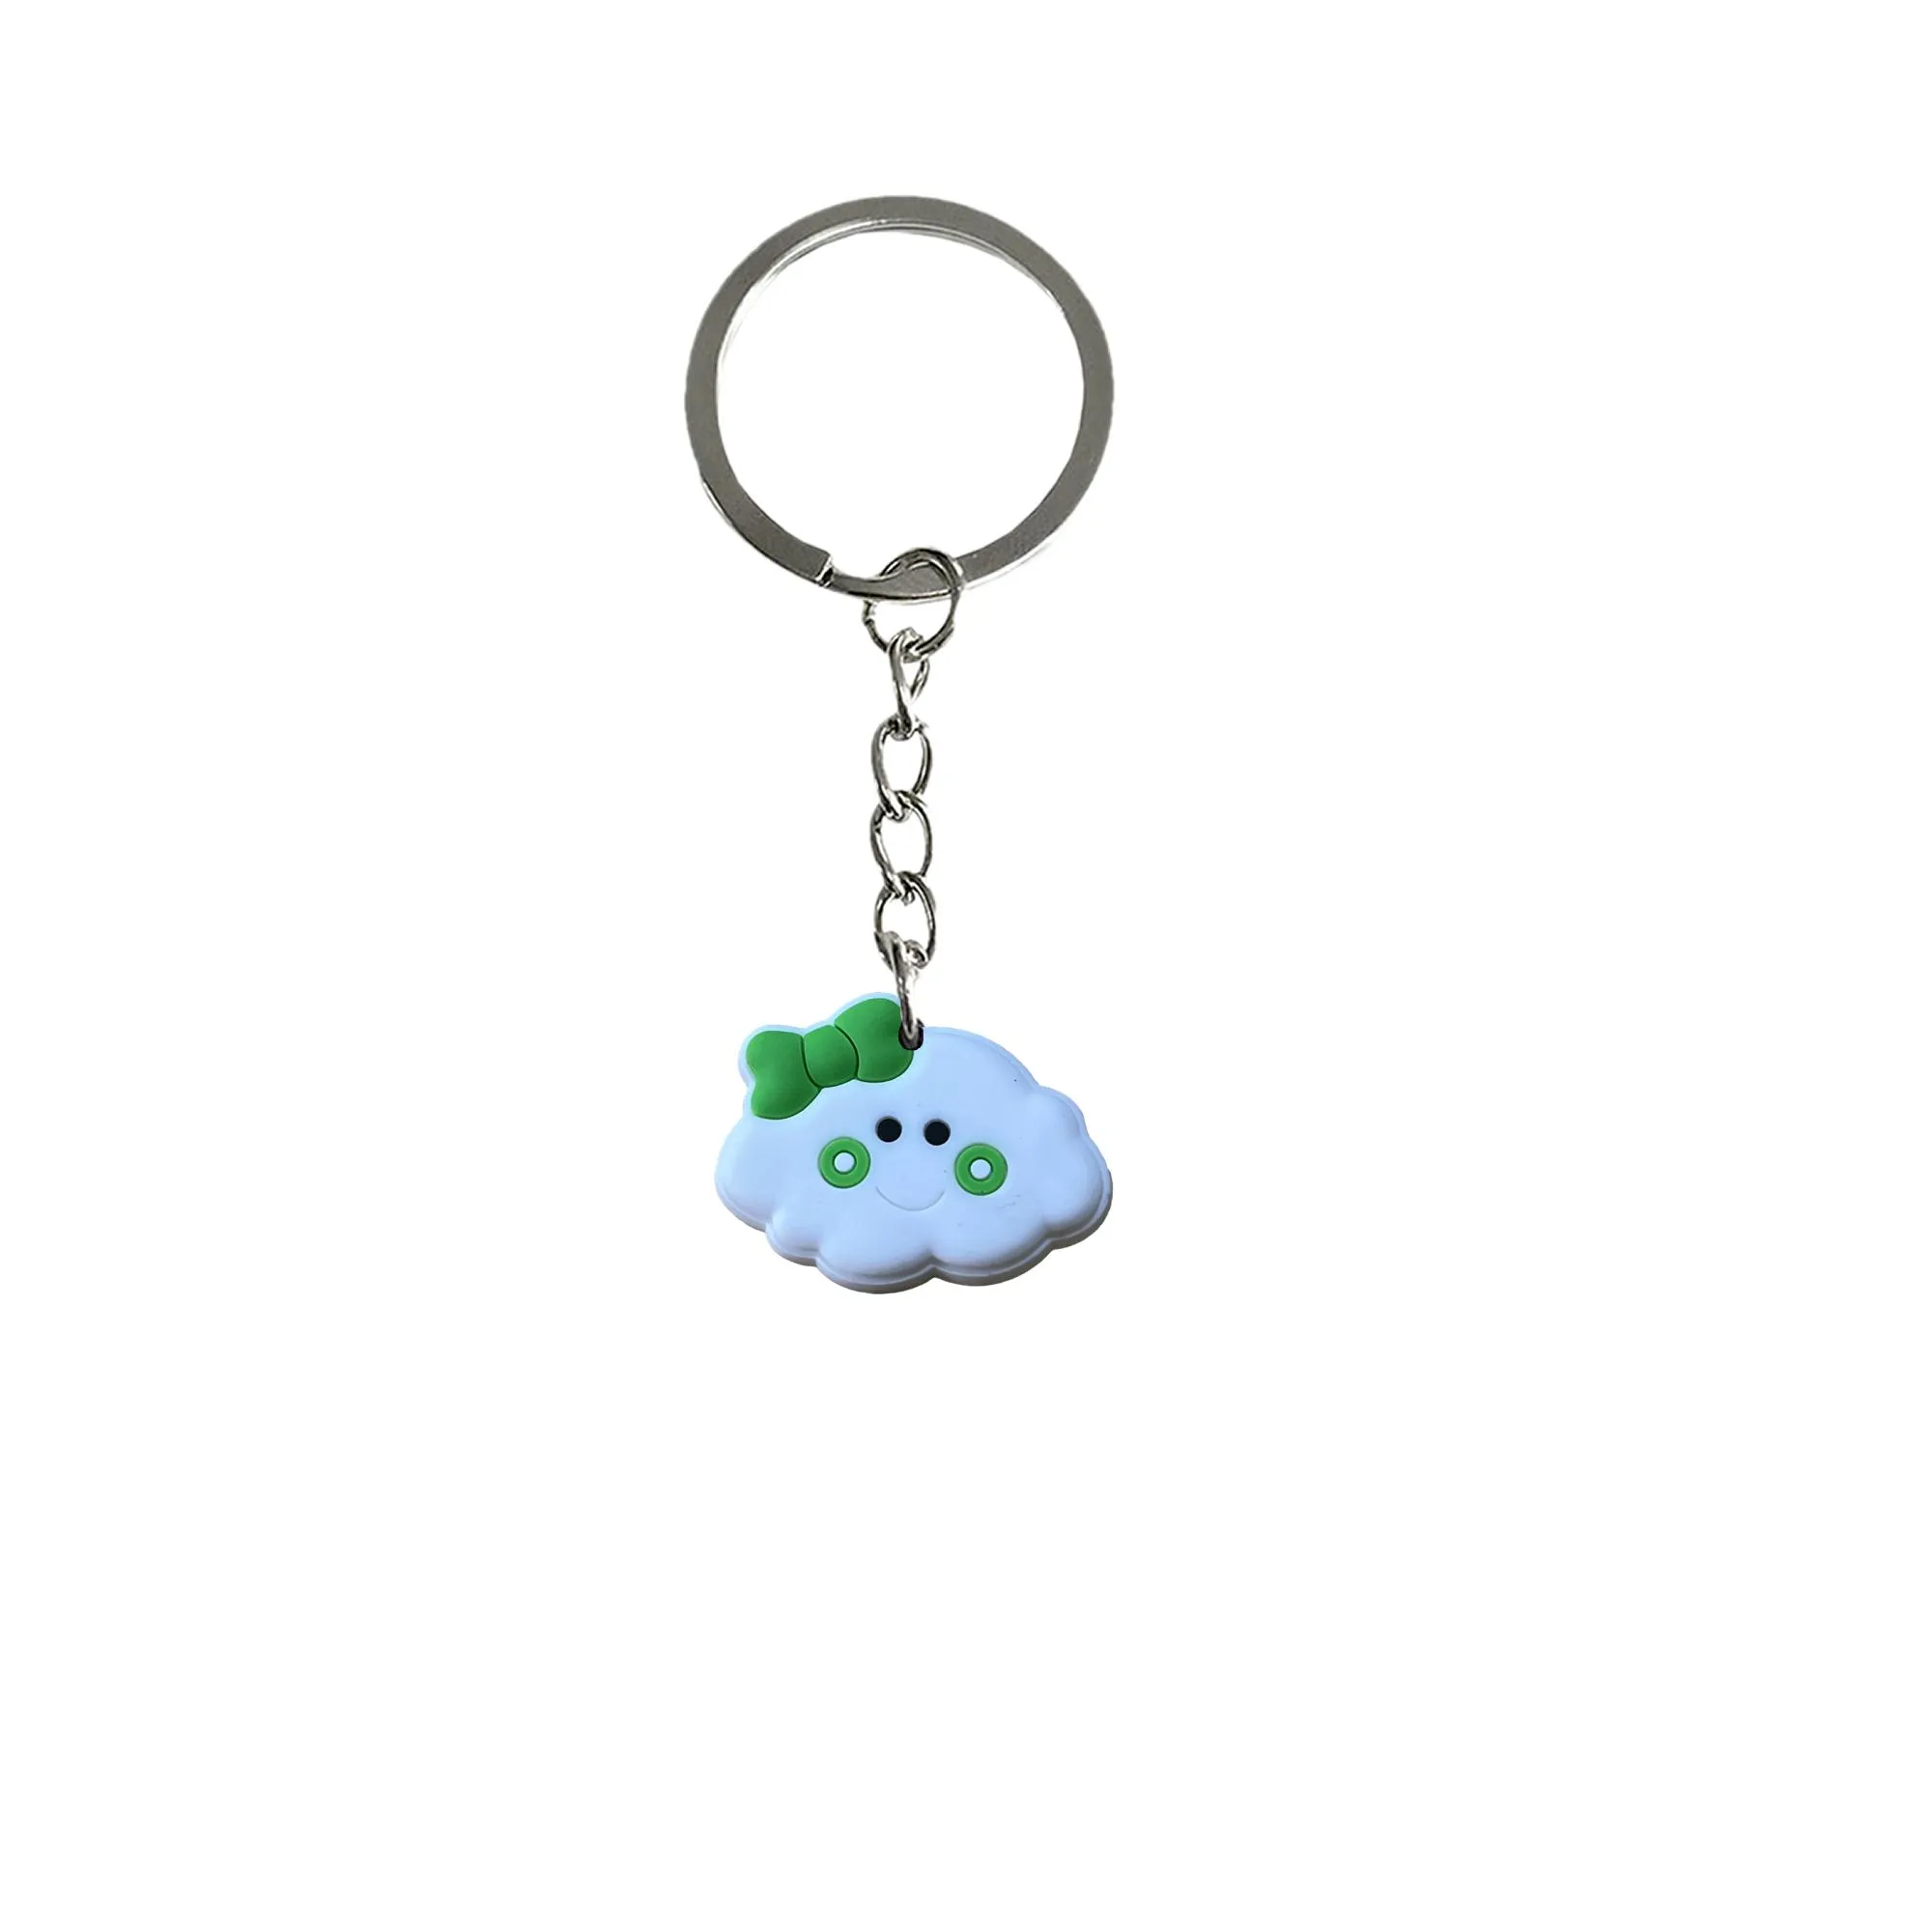 cloud keychain for classroom prizes pendants accessories kids birthday party favors keychains women keyring suitable schoolbag mini cute key chain ring christmas gift fans girls